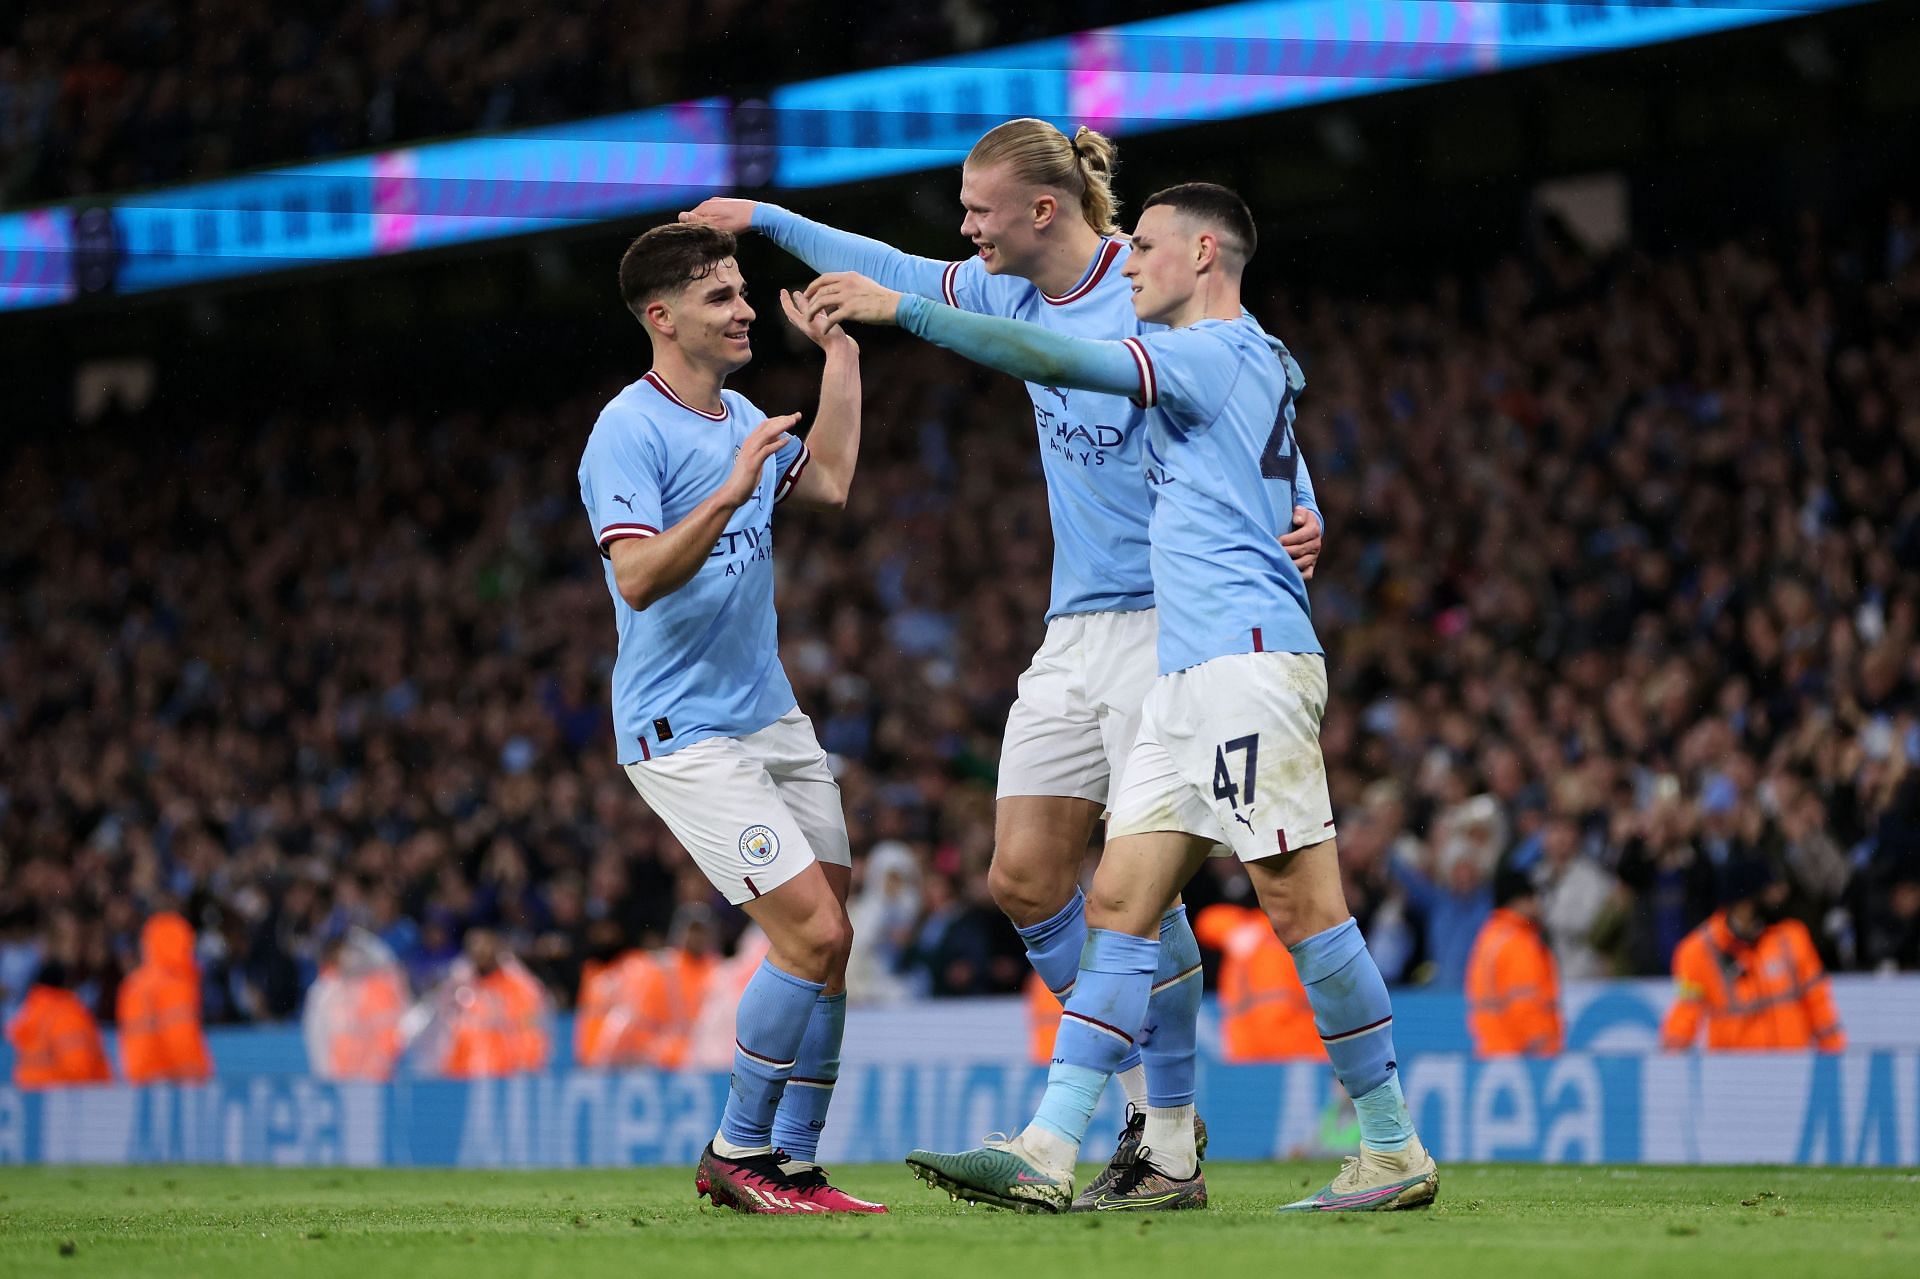 [L-to-R] Manchester City forwards Julian Alvarez, Erling Haaland and Phil Foden